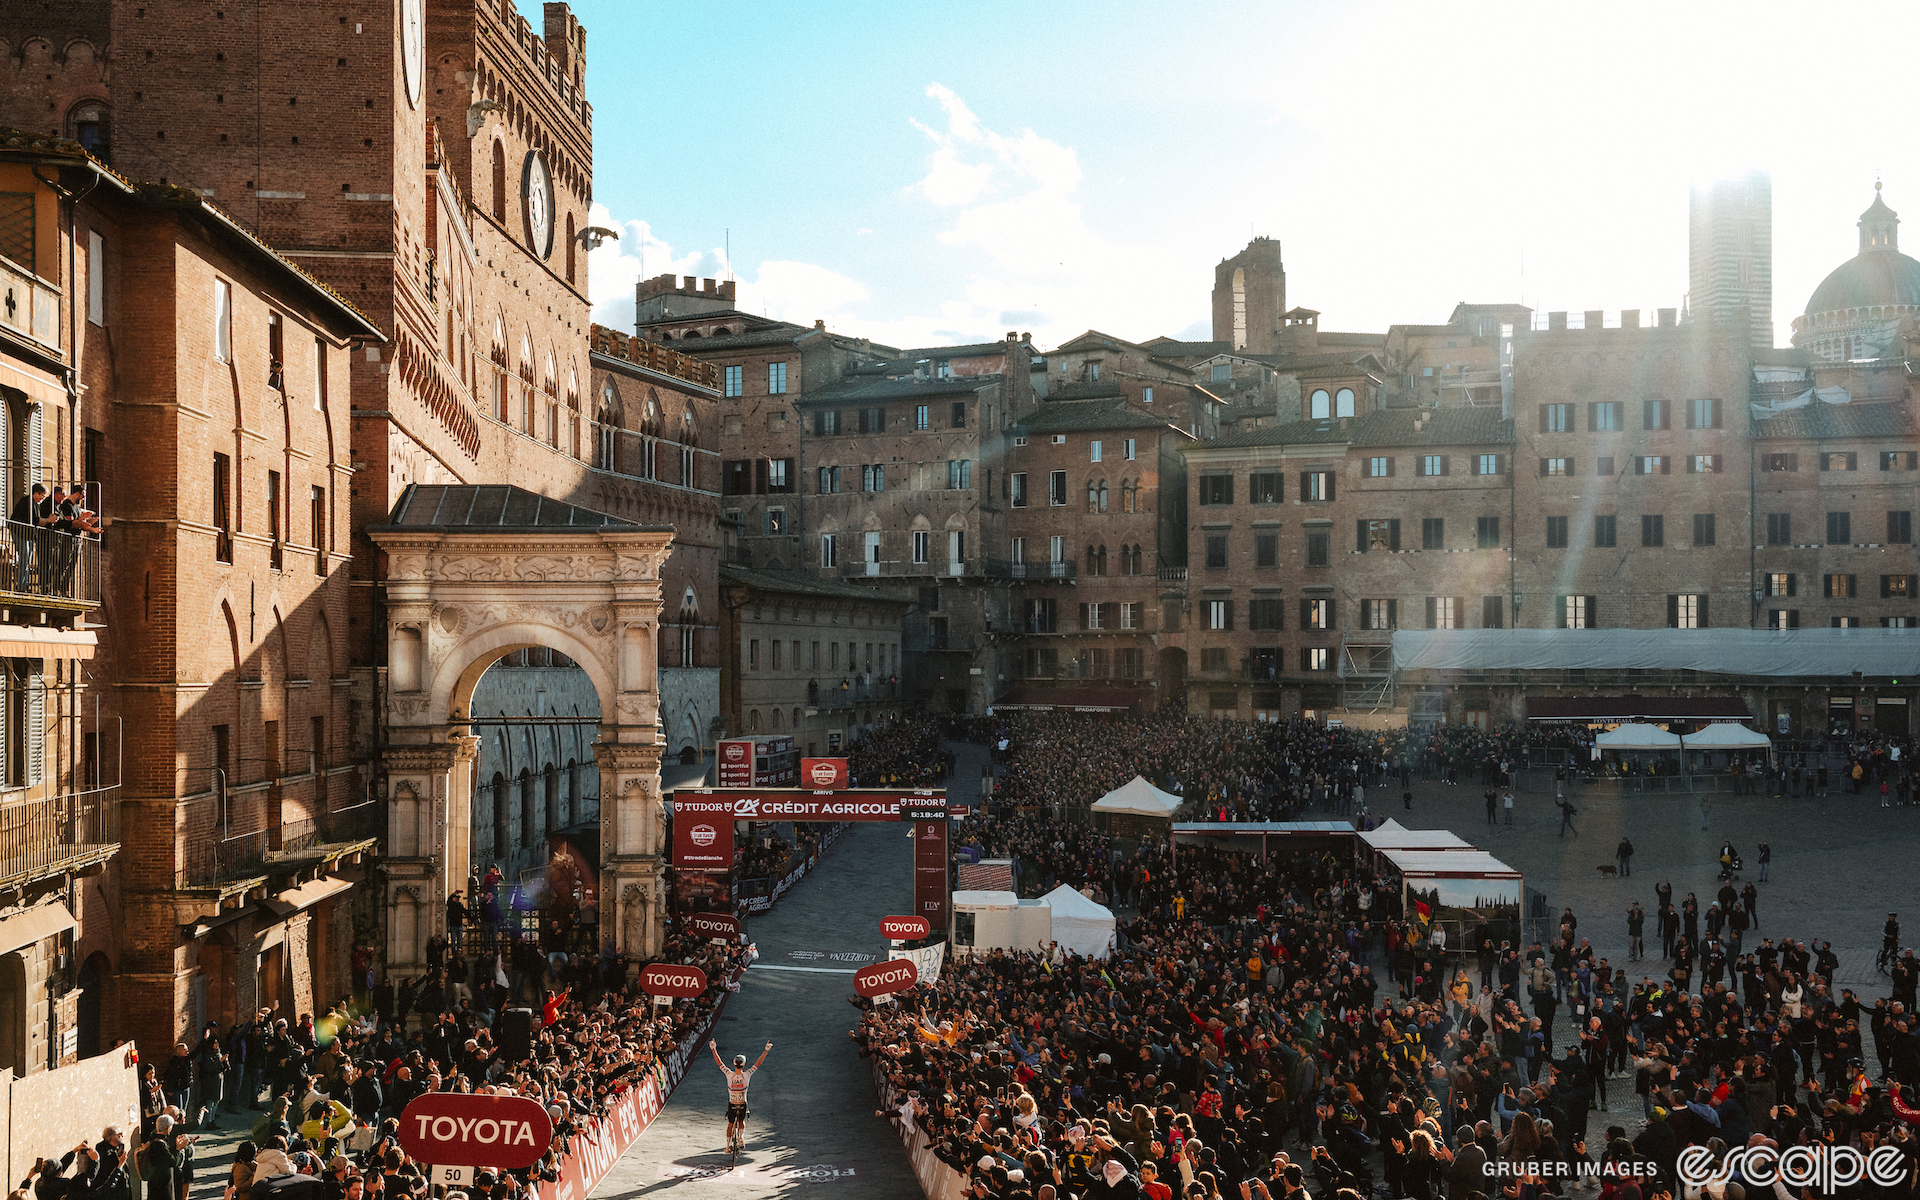 Tadej Pogačar raises both arms over his head as he crosses the finish line alone to win the 2024 Strade Bianche. He is shot from behind, sitting up as he approaches the finish gantry next to the arch and tall clocktower in Siena's Piazza del Campo. Large crowds gather in the square, and the setting sun lights up Pogačar and the building next to him.